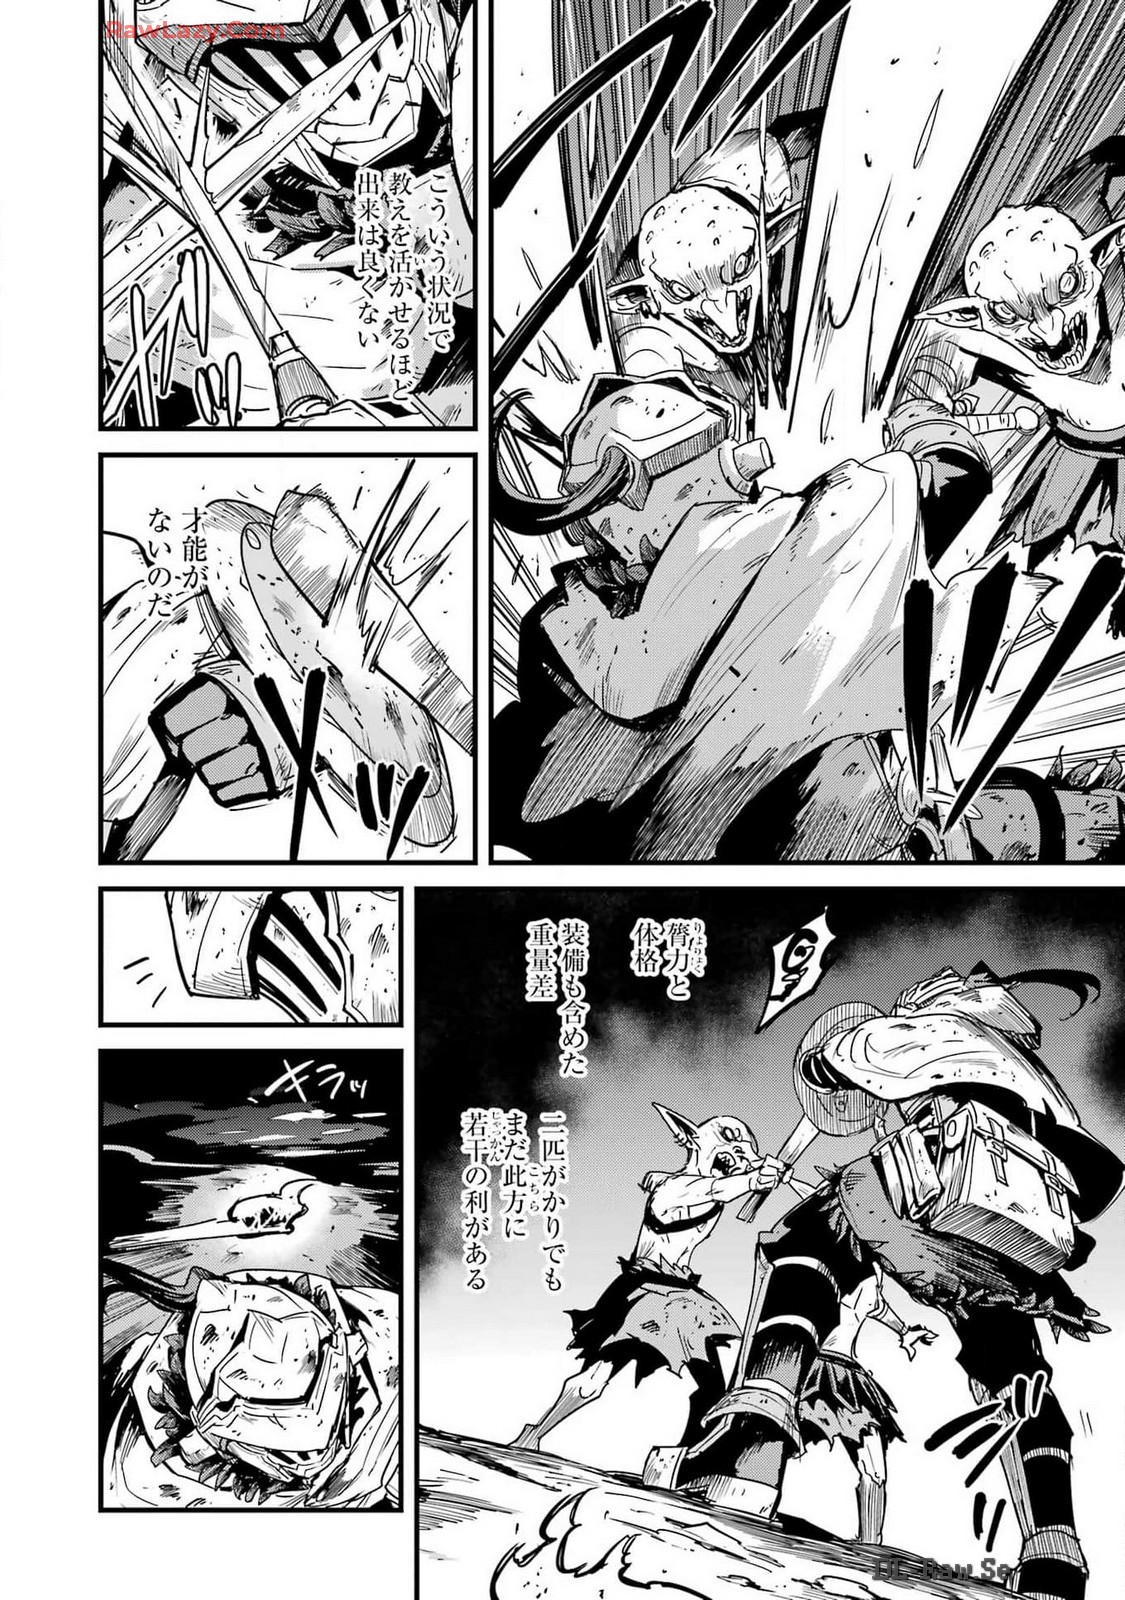 Goblin Slayer: Side Story Year One - Chapter 104 - Page 2